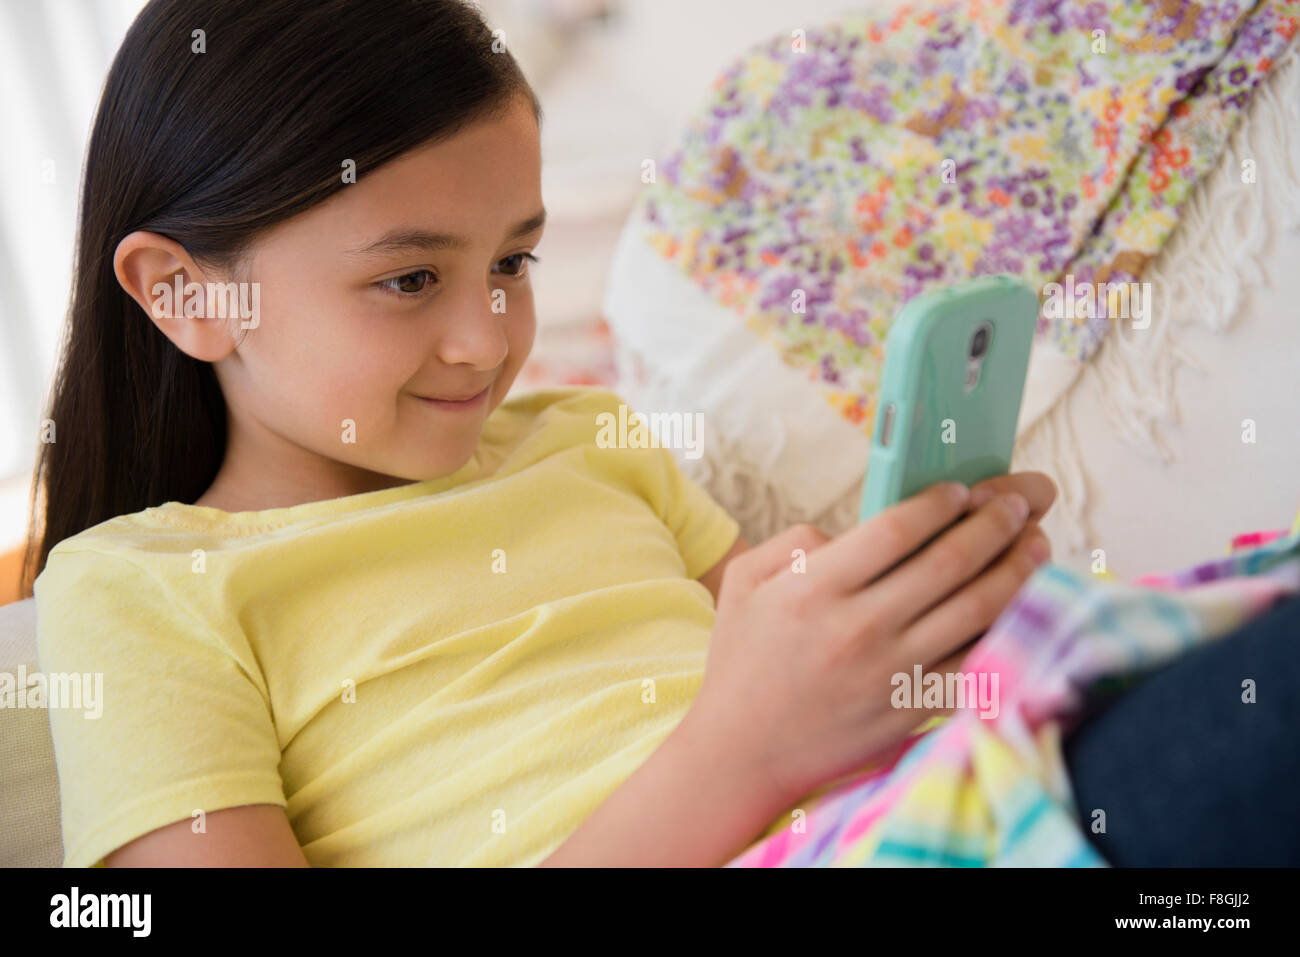 Smiling girl using cell phone Stock Photo